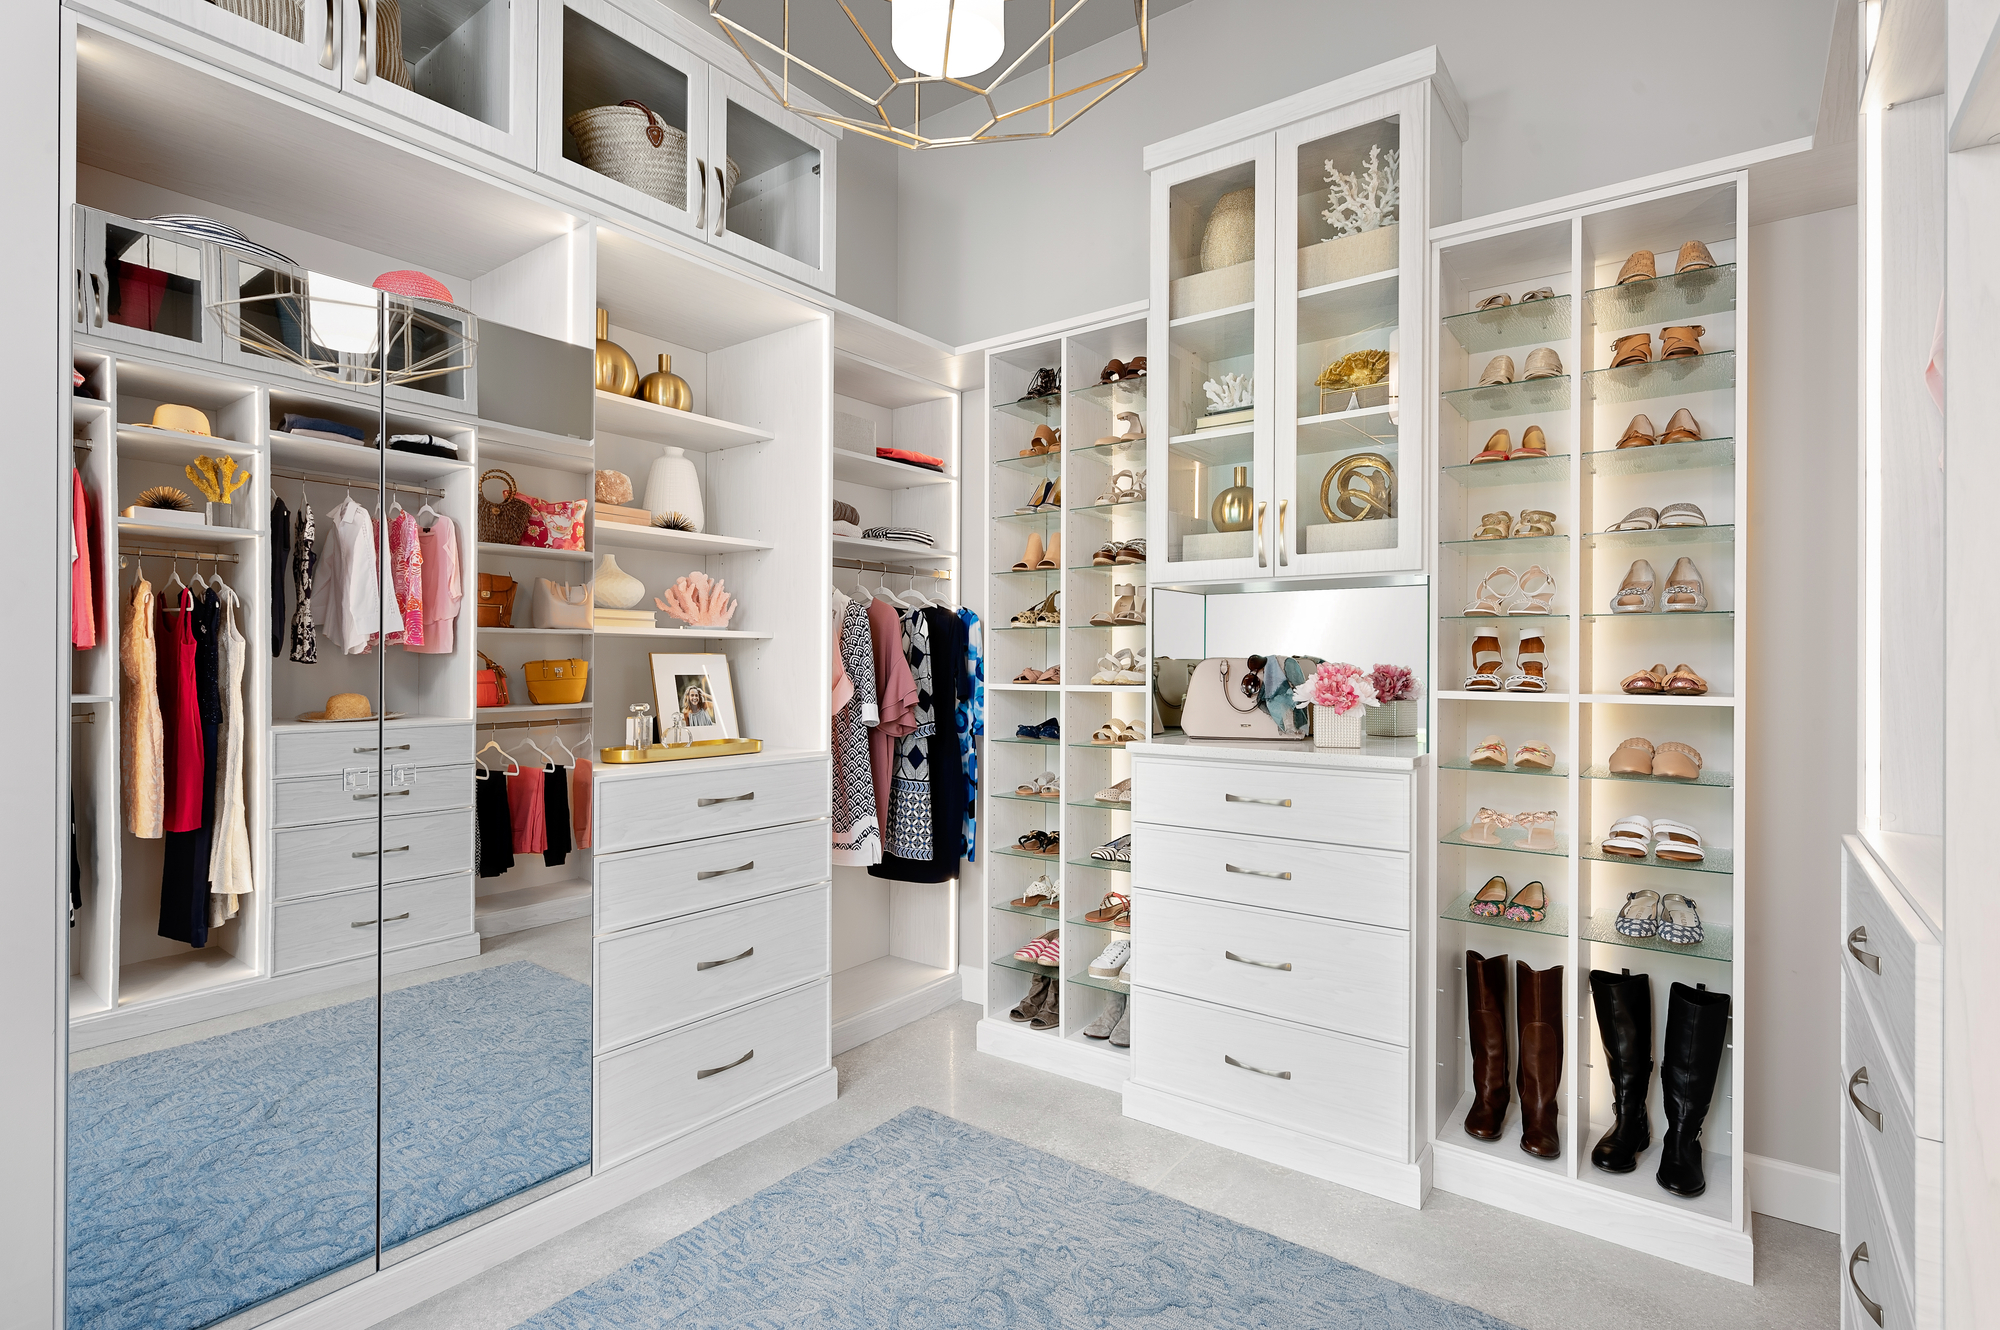 When Did Custom Closets Become the Ultimate Status Symbol? - WSJ